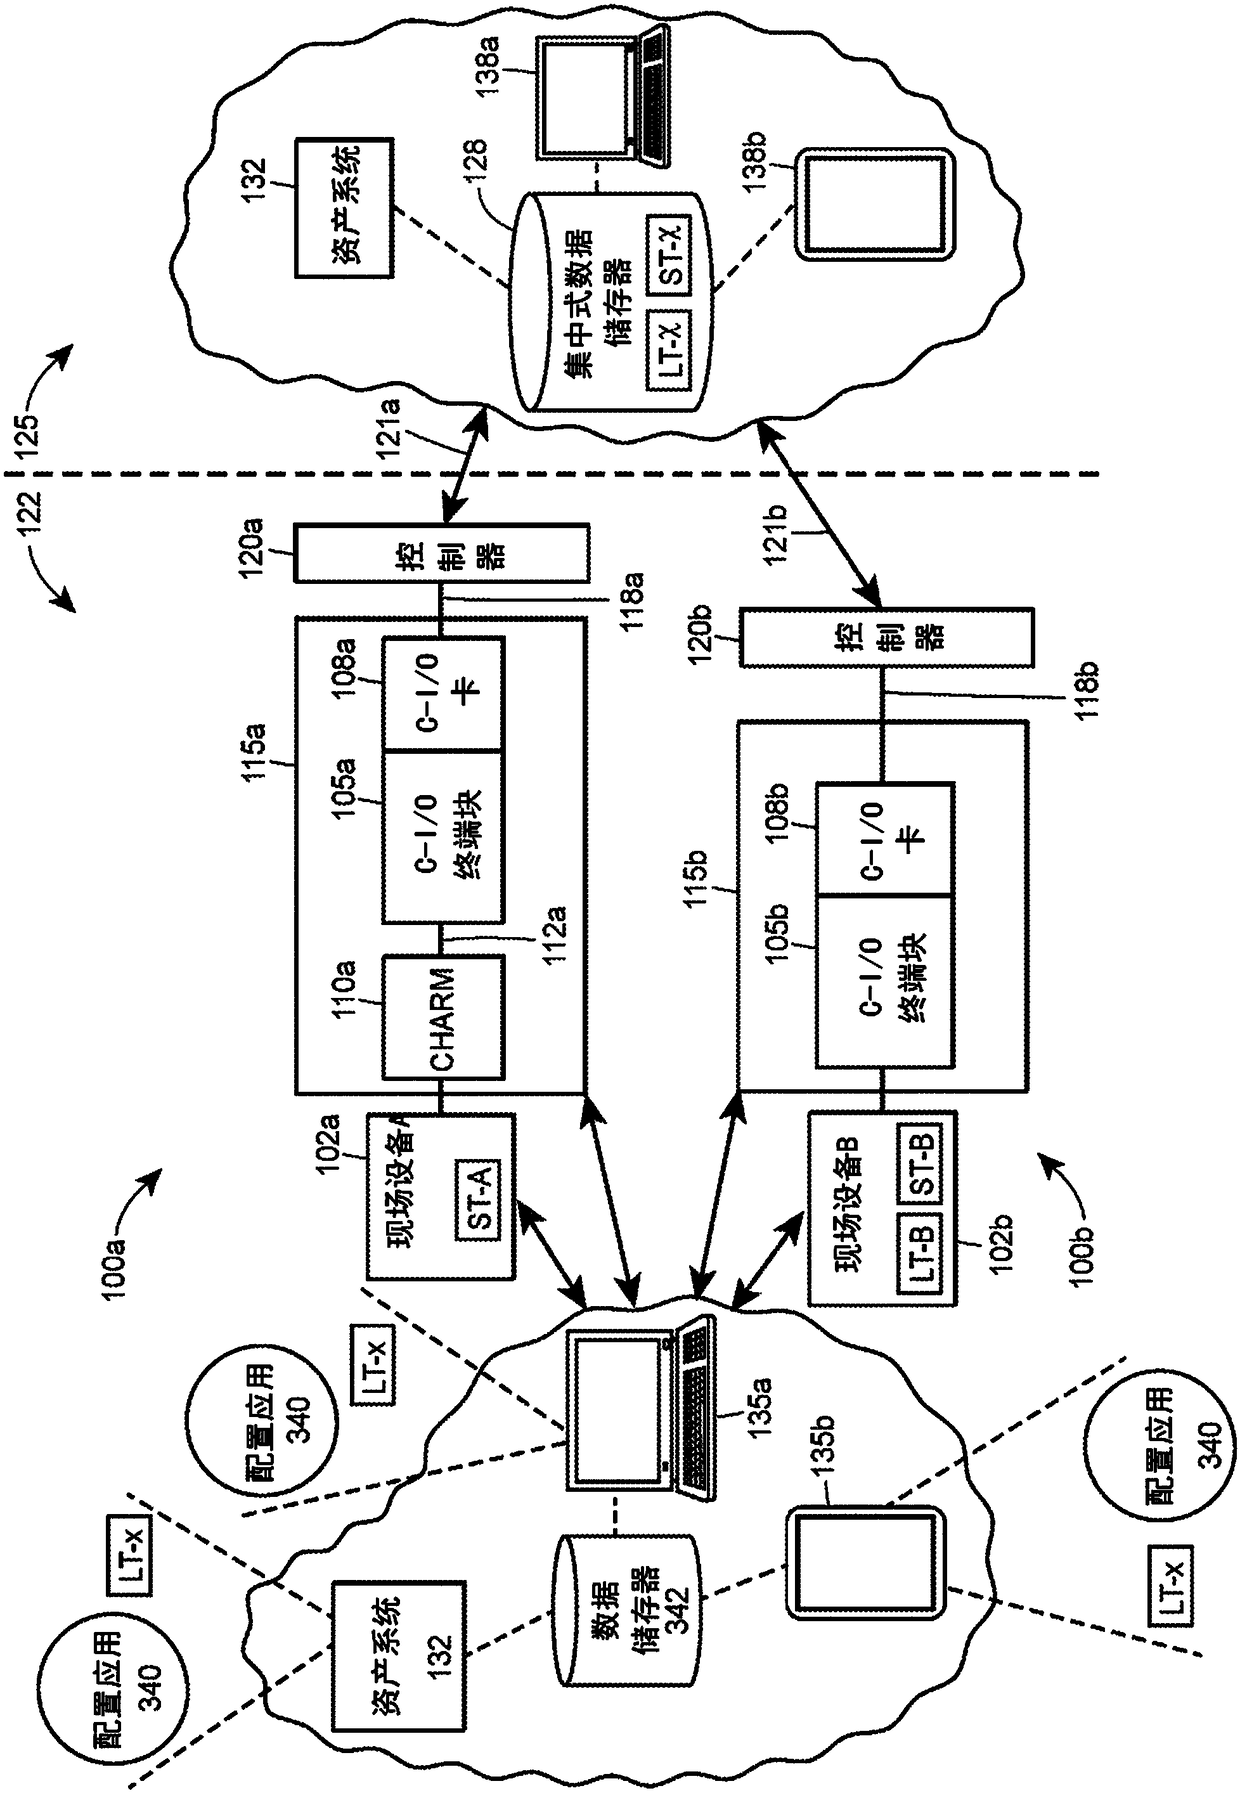 Automatic distribution of device parameters for commissioning portions of a disconnected process control loop